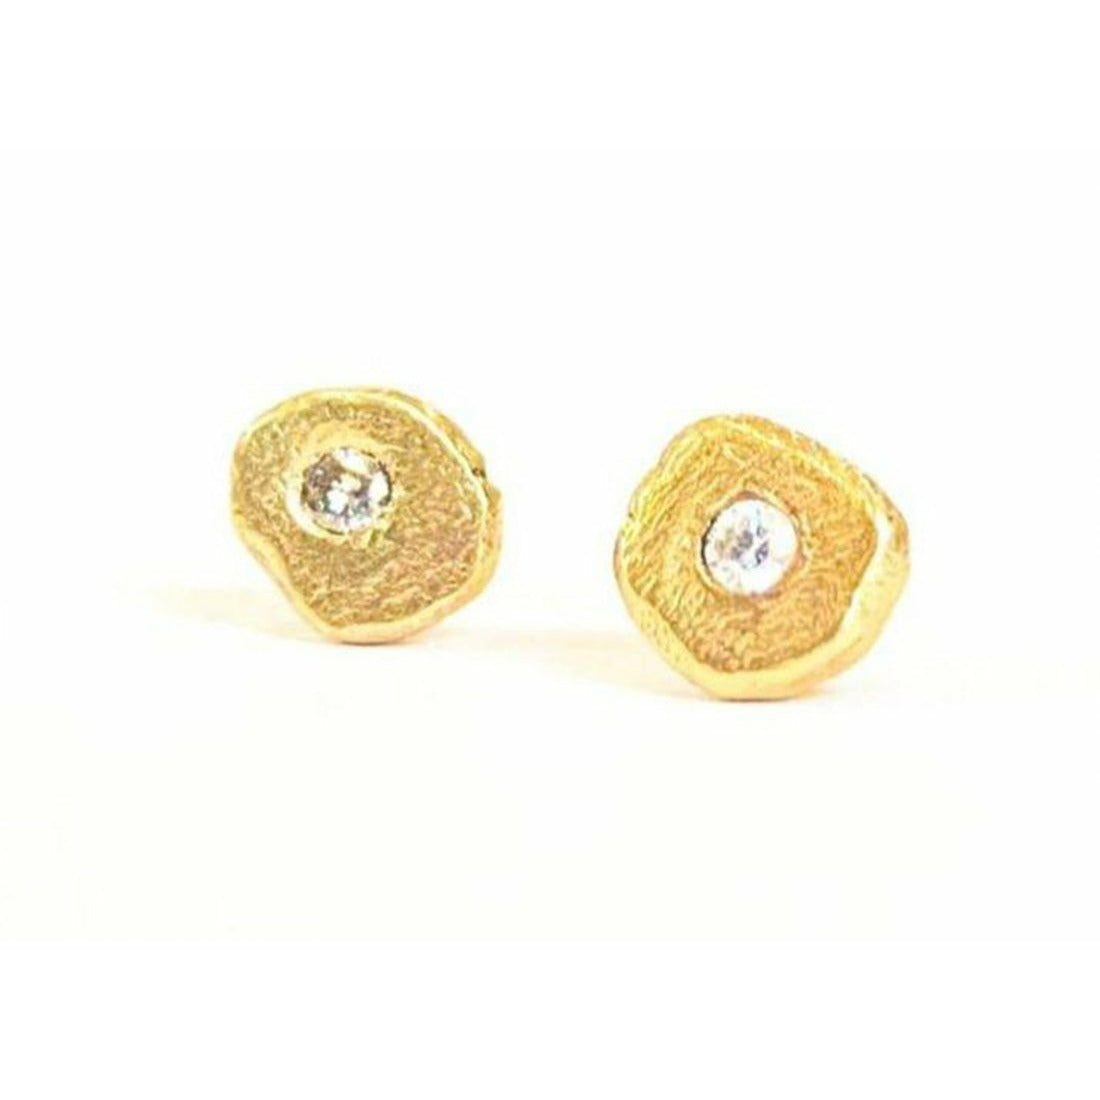 Details.  Add a touch of elegance and sophistication to your look with these stunning textured diamond stud earrings. The intricate textured design adds a unique twist to the classic diamond studs, creating a sparkling and glamorous accessory that will elevate any outfit.  1.8 mm pointer diamond flush set.  6mm-6.25  not a regular shape textured.  small butterfly back.